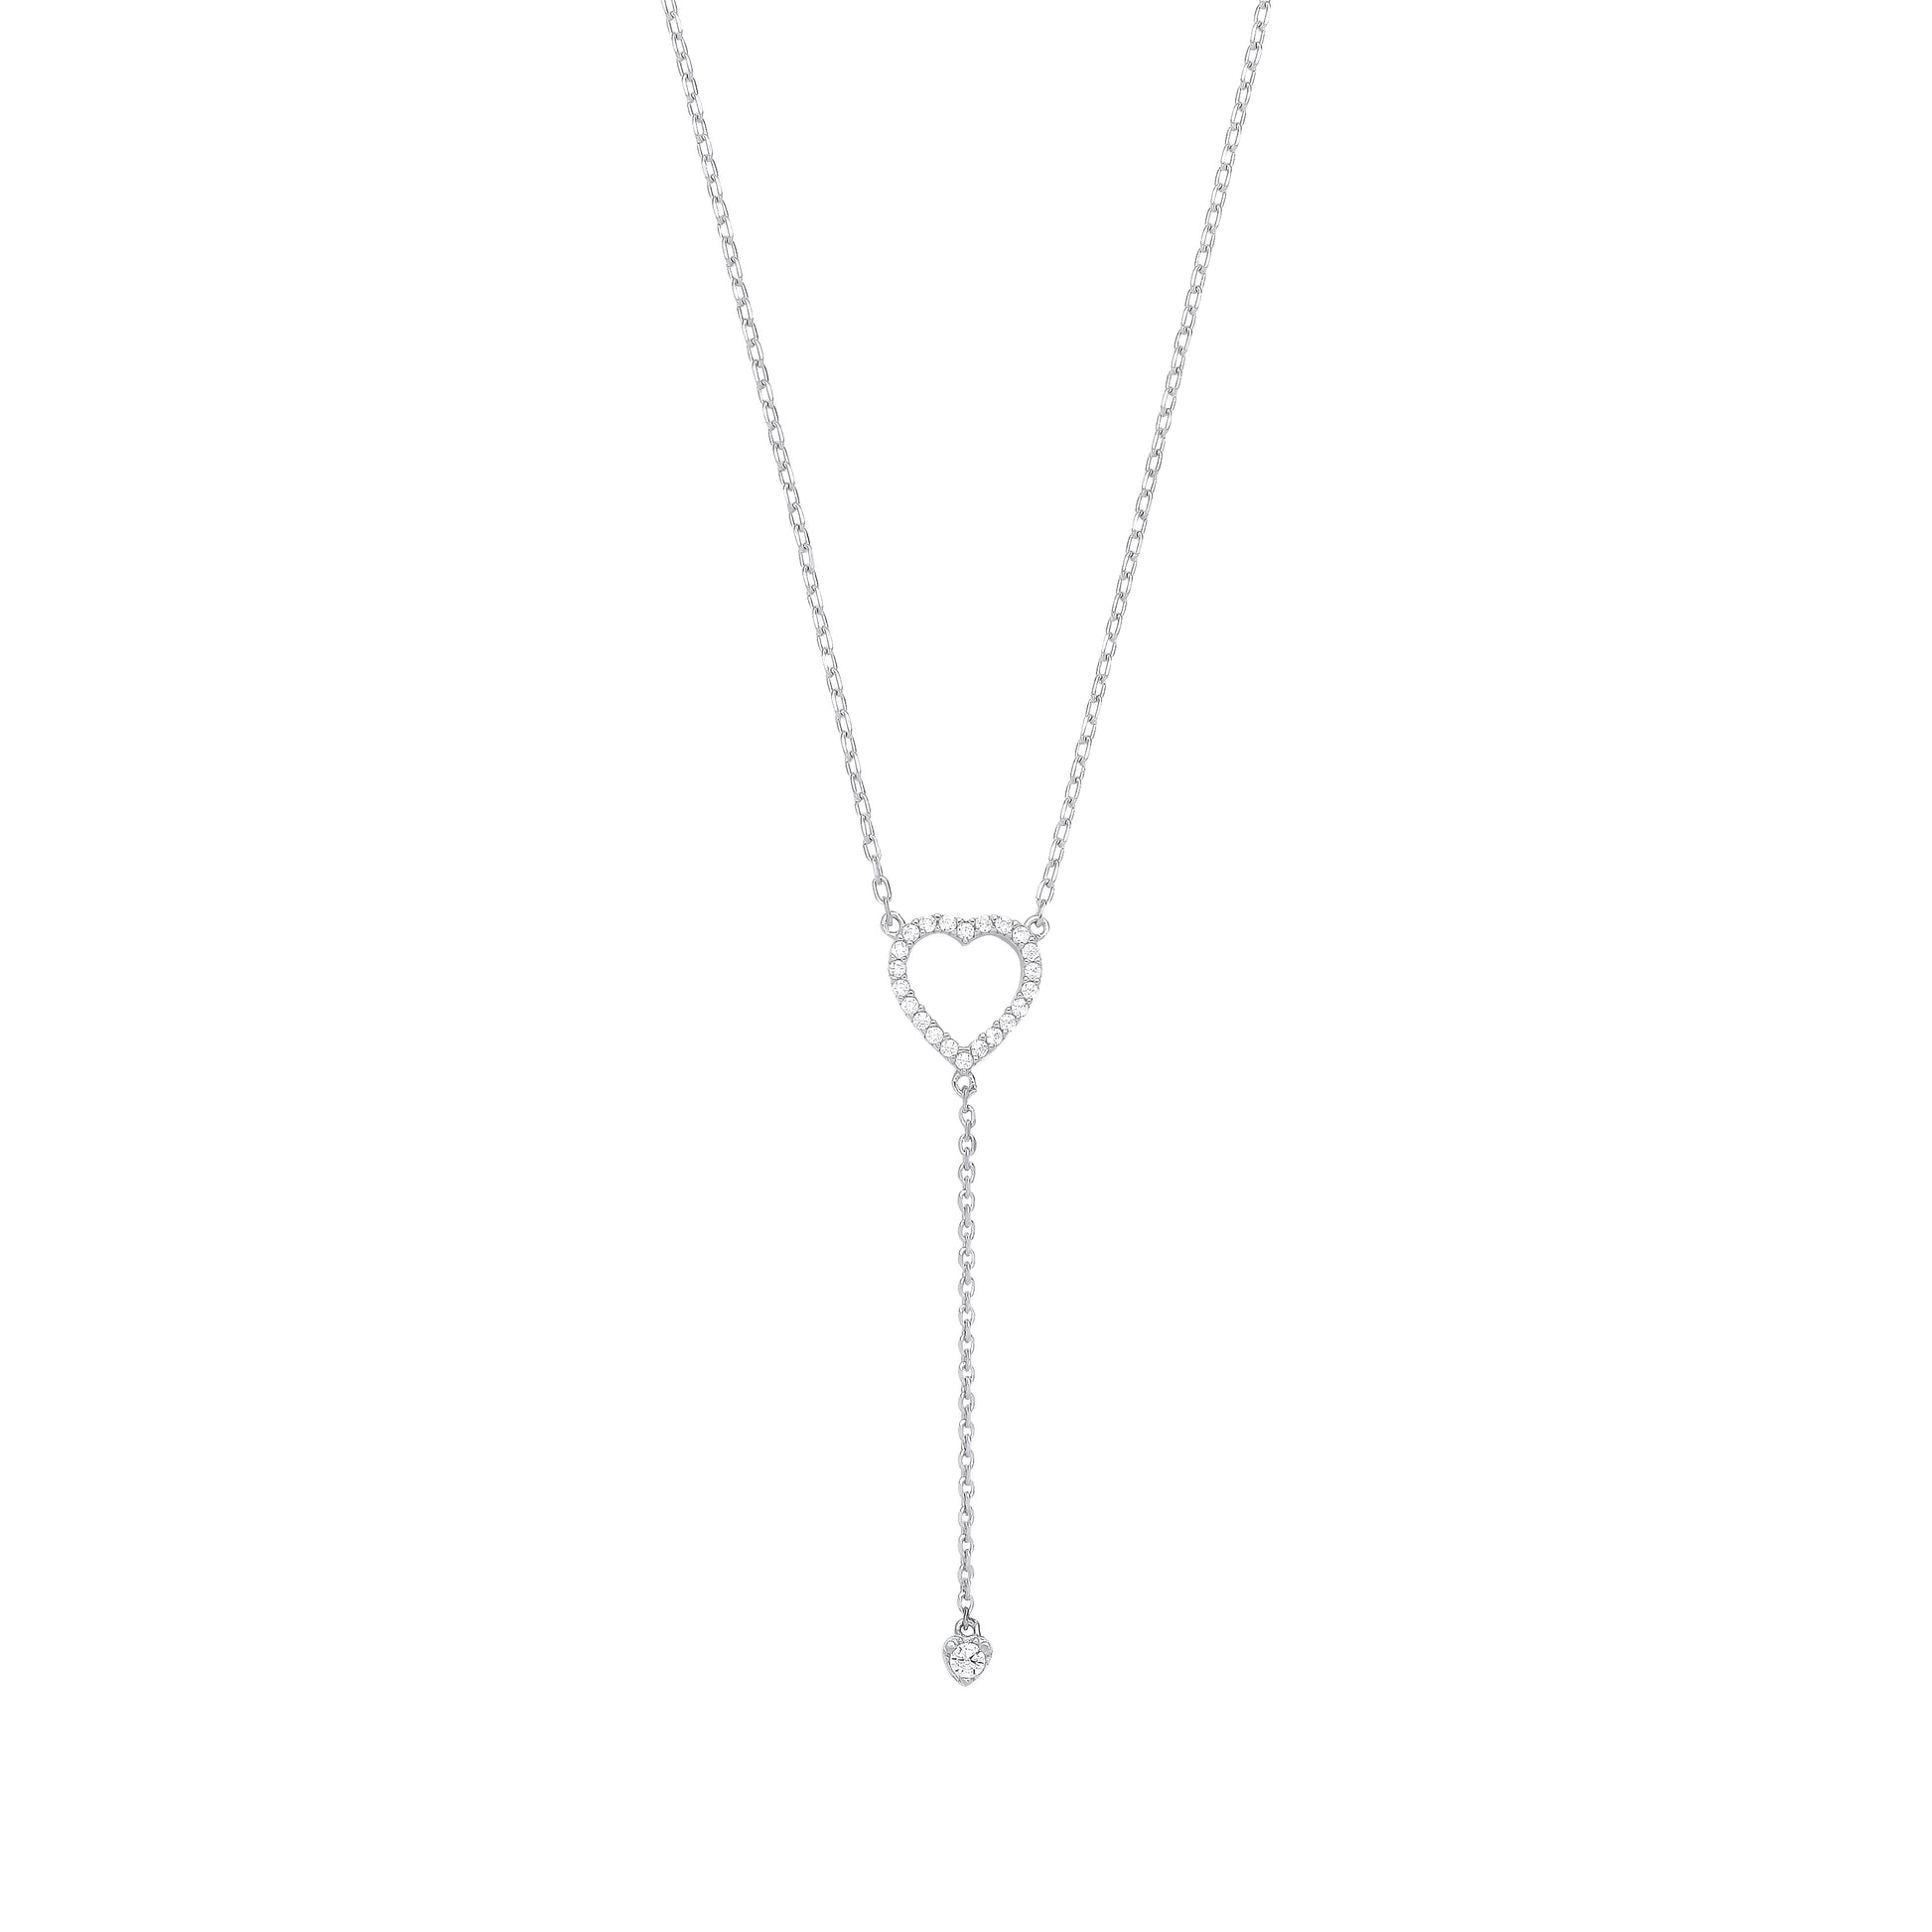 Silver  Lil n Large Love Hearts Lariat Necklace - GVK389